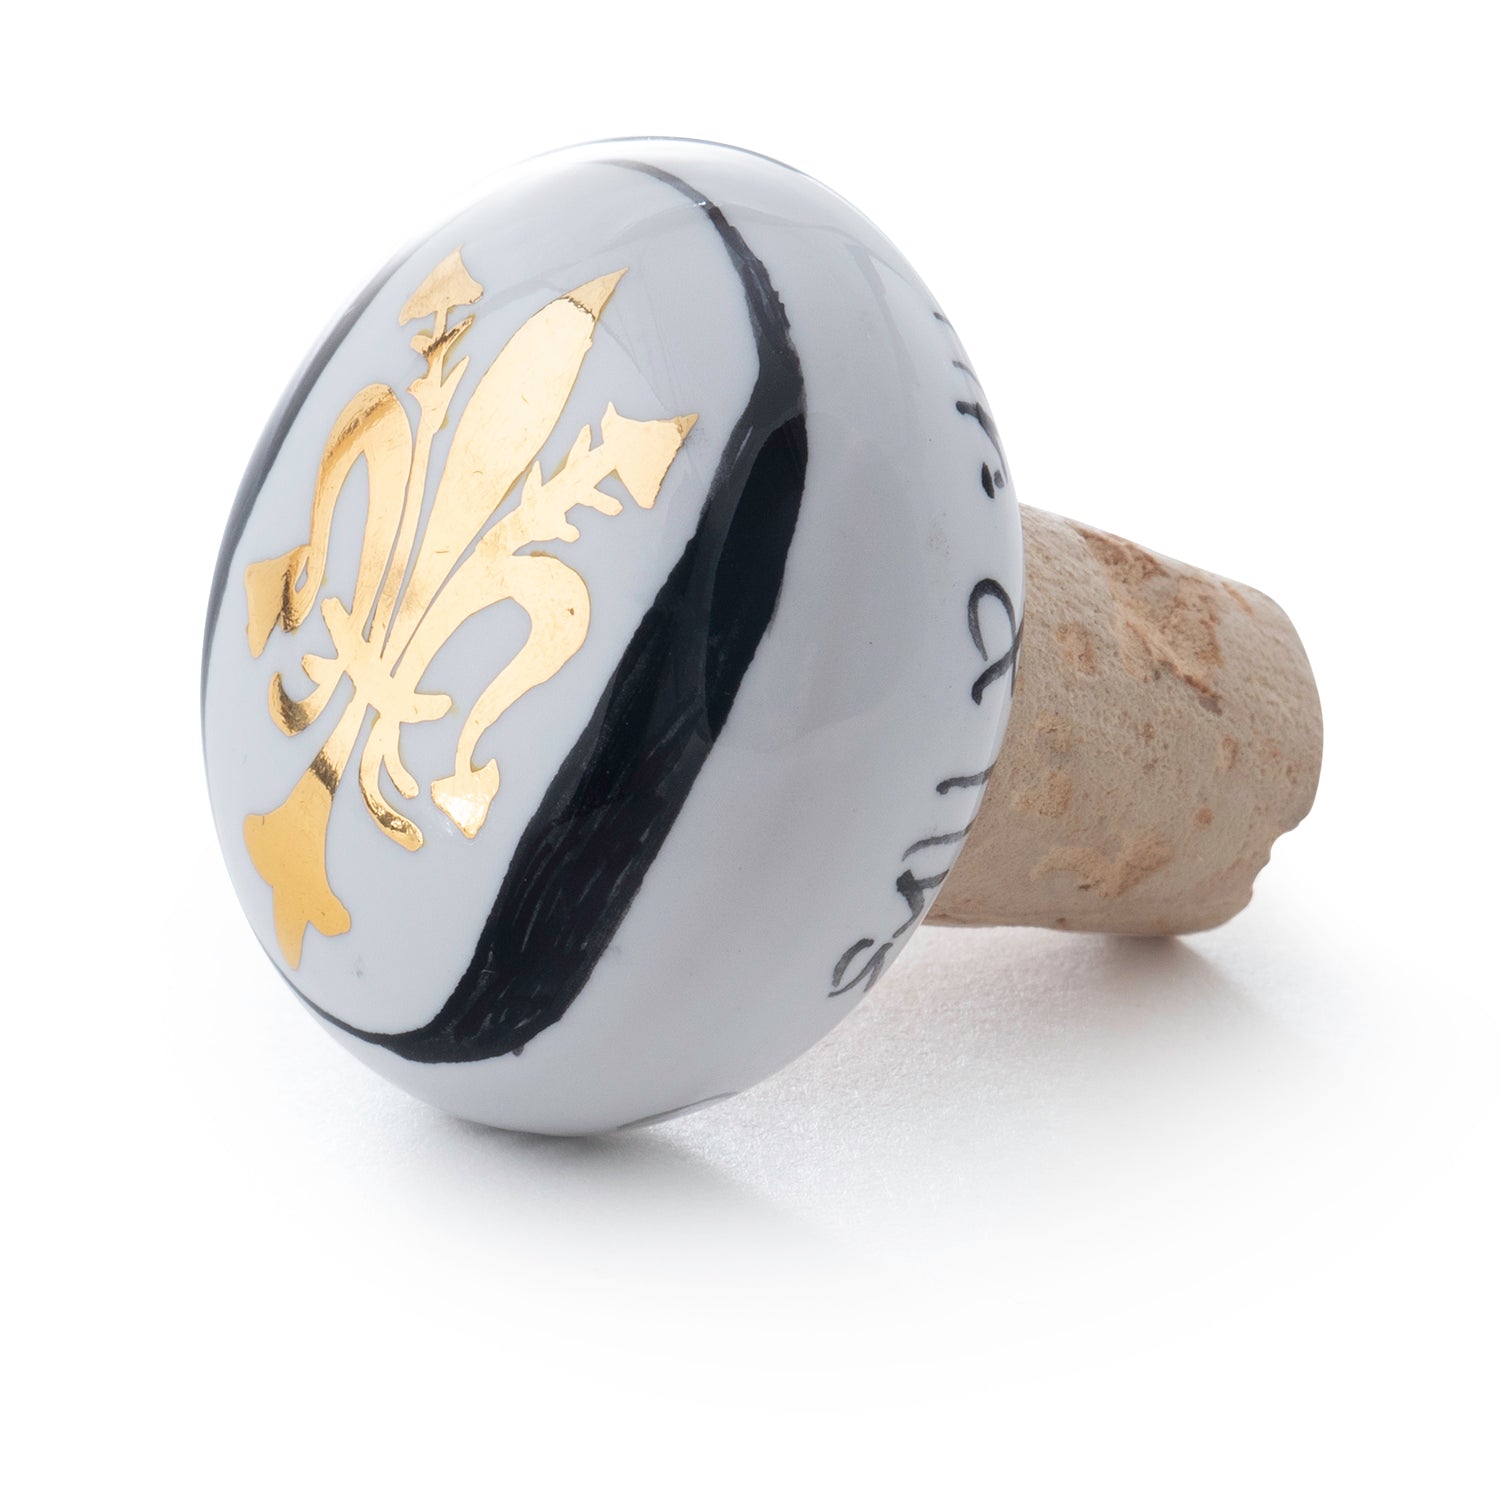 Biordi Oro Wine Stopper, ceramics, pottery, italian design, majolica, handmade, handcrafted, handpainted, home decor, kitchen art, home goods, deruta, majolica, Artisan, treasures, traditional art, modern art, gift ideas, style, SF, shop small business, artists, shop online, landmark store, legacy, one of a kind, limited edition, gift guide, gift shop, retail shop, decorations, shopping, italy, home staging, home decorating, home interiors